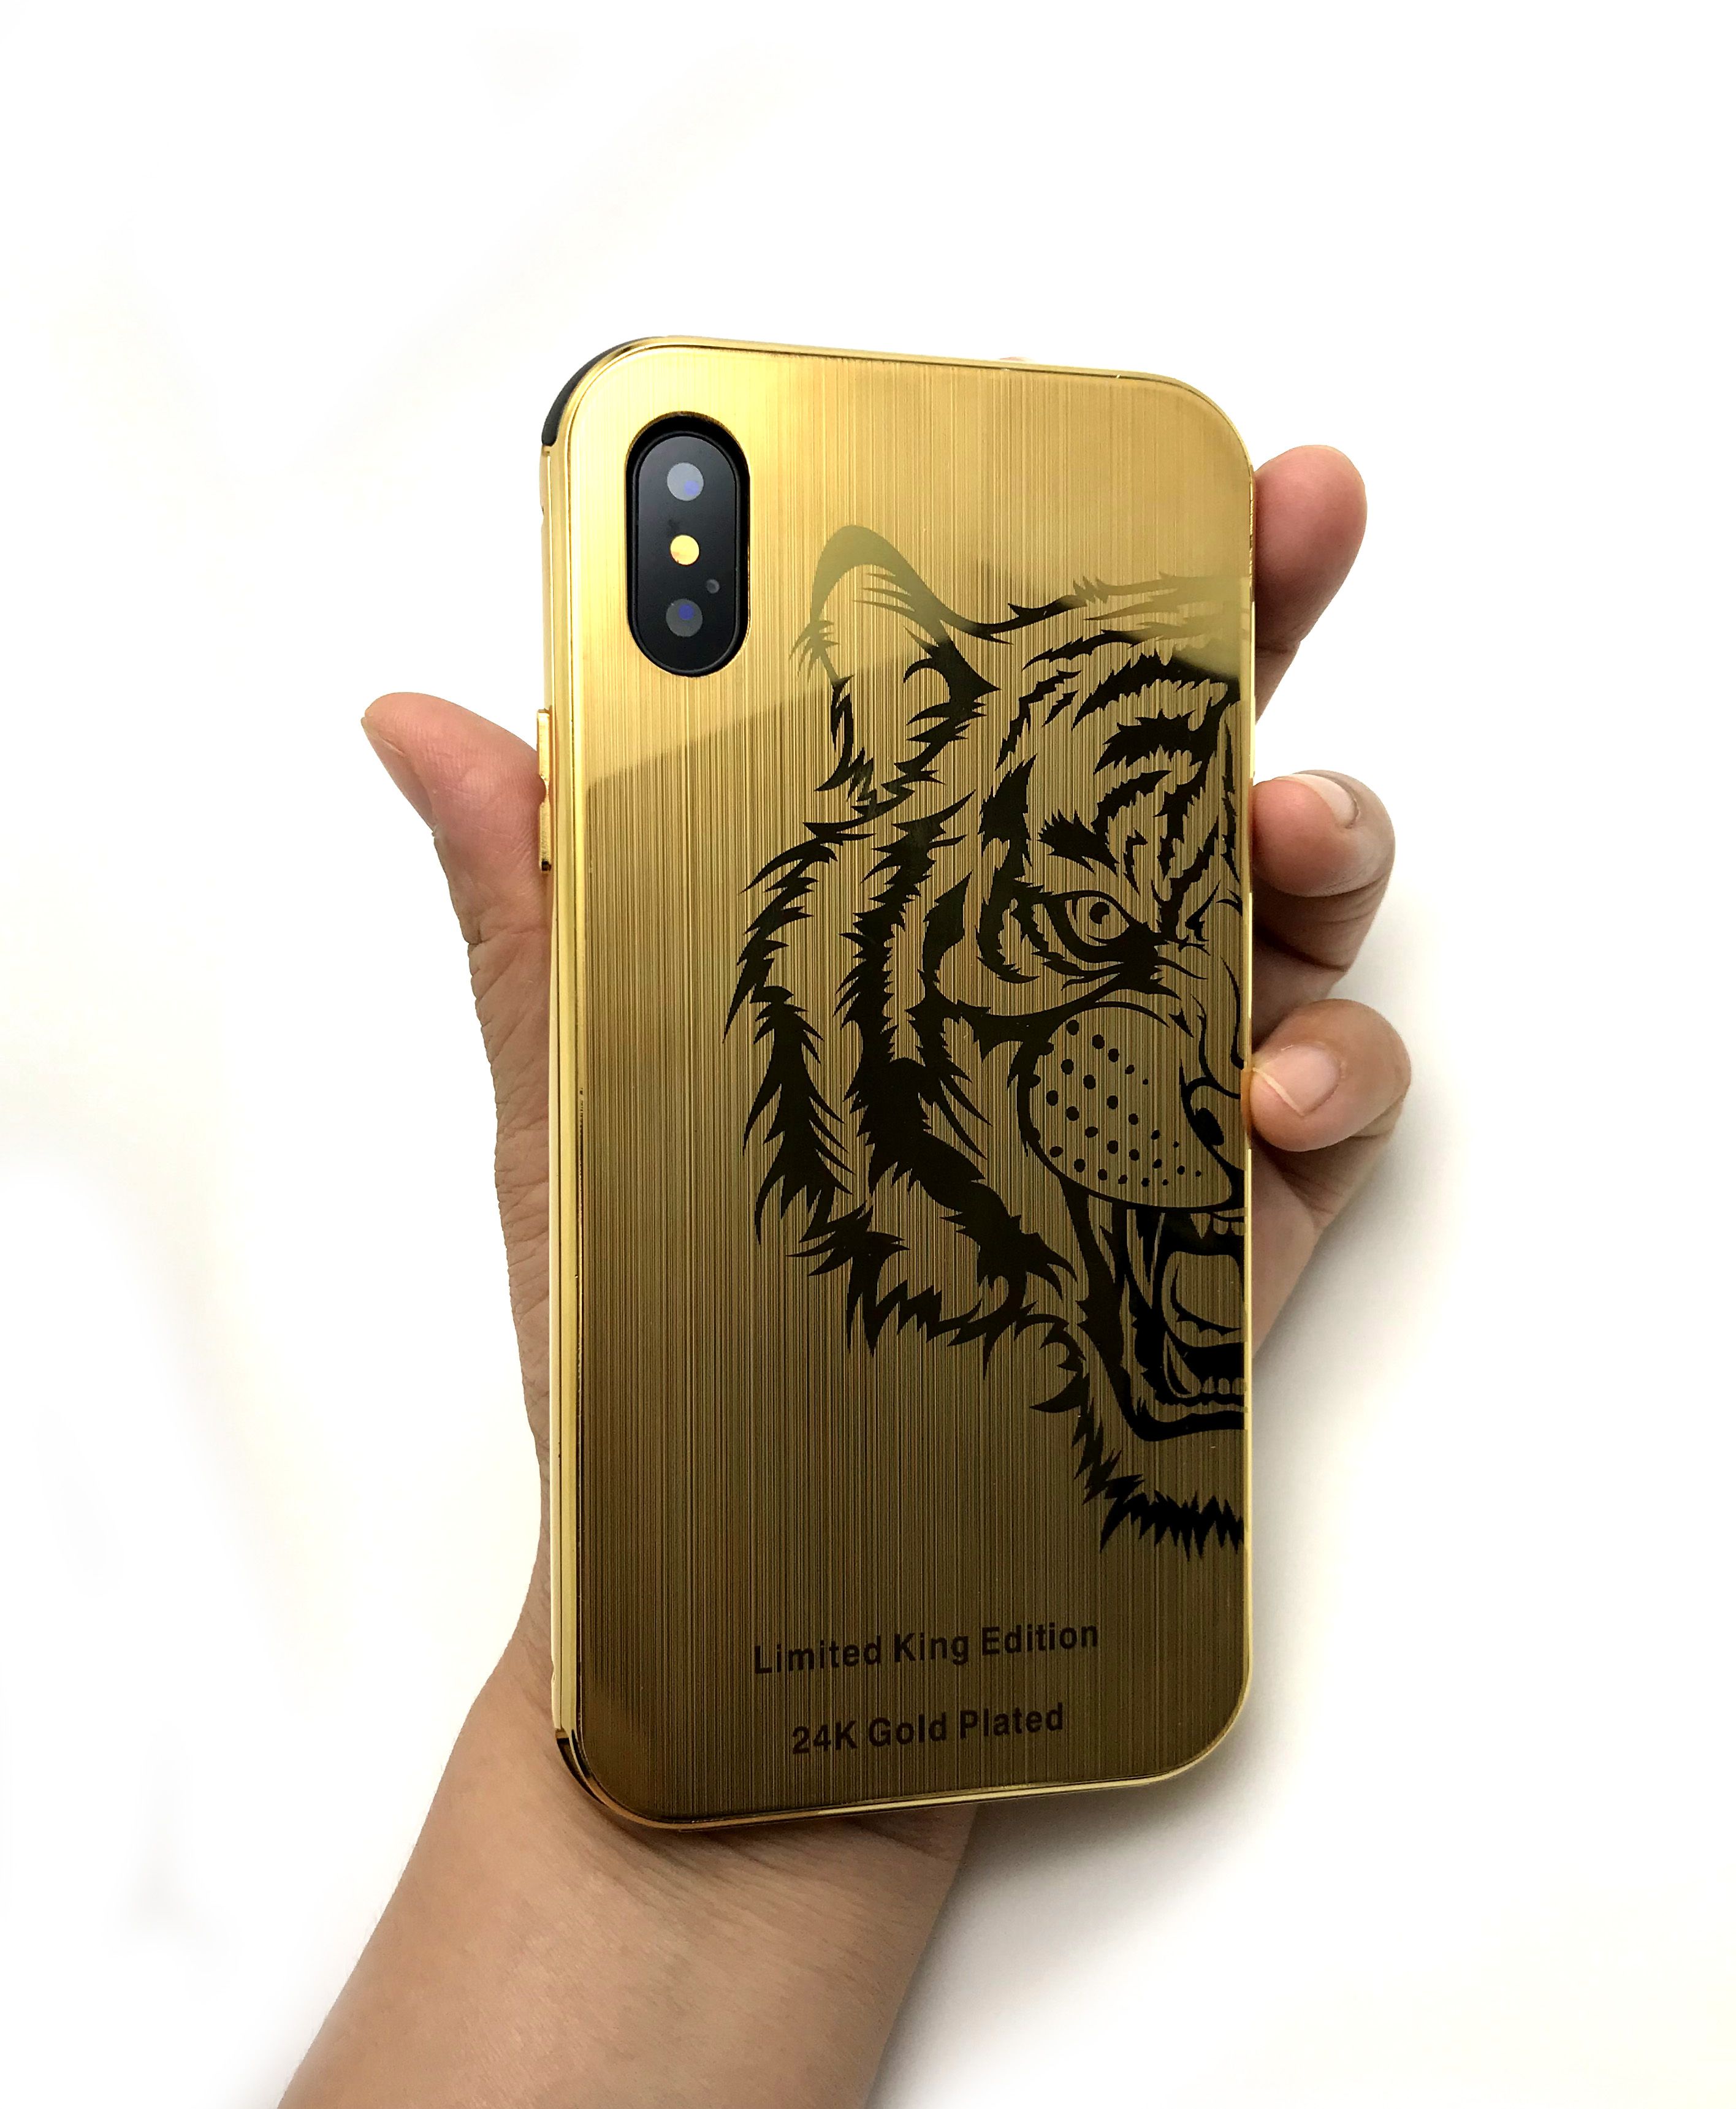 2020 Luxury Tiger Limited Edition IPhone X Case 24k Gold Plated Metal